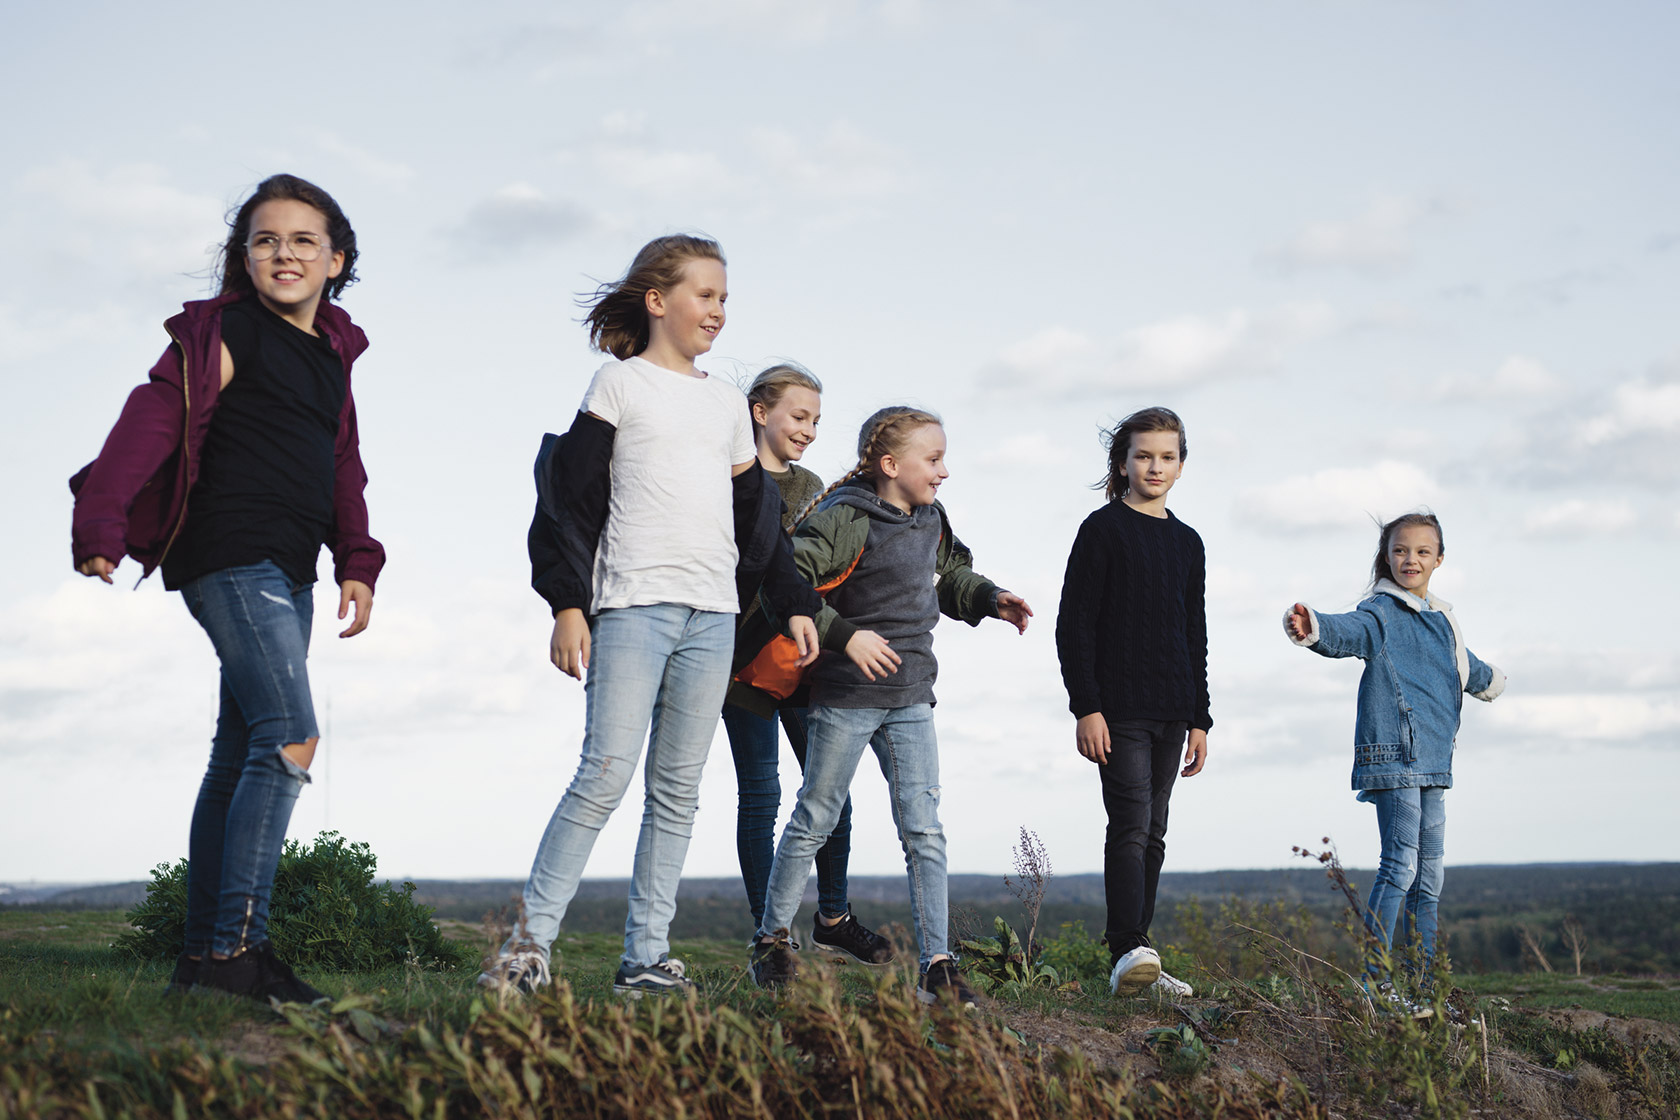 A group of children on a windy hill